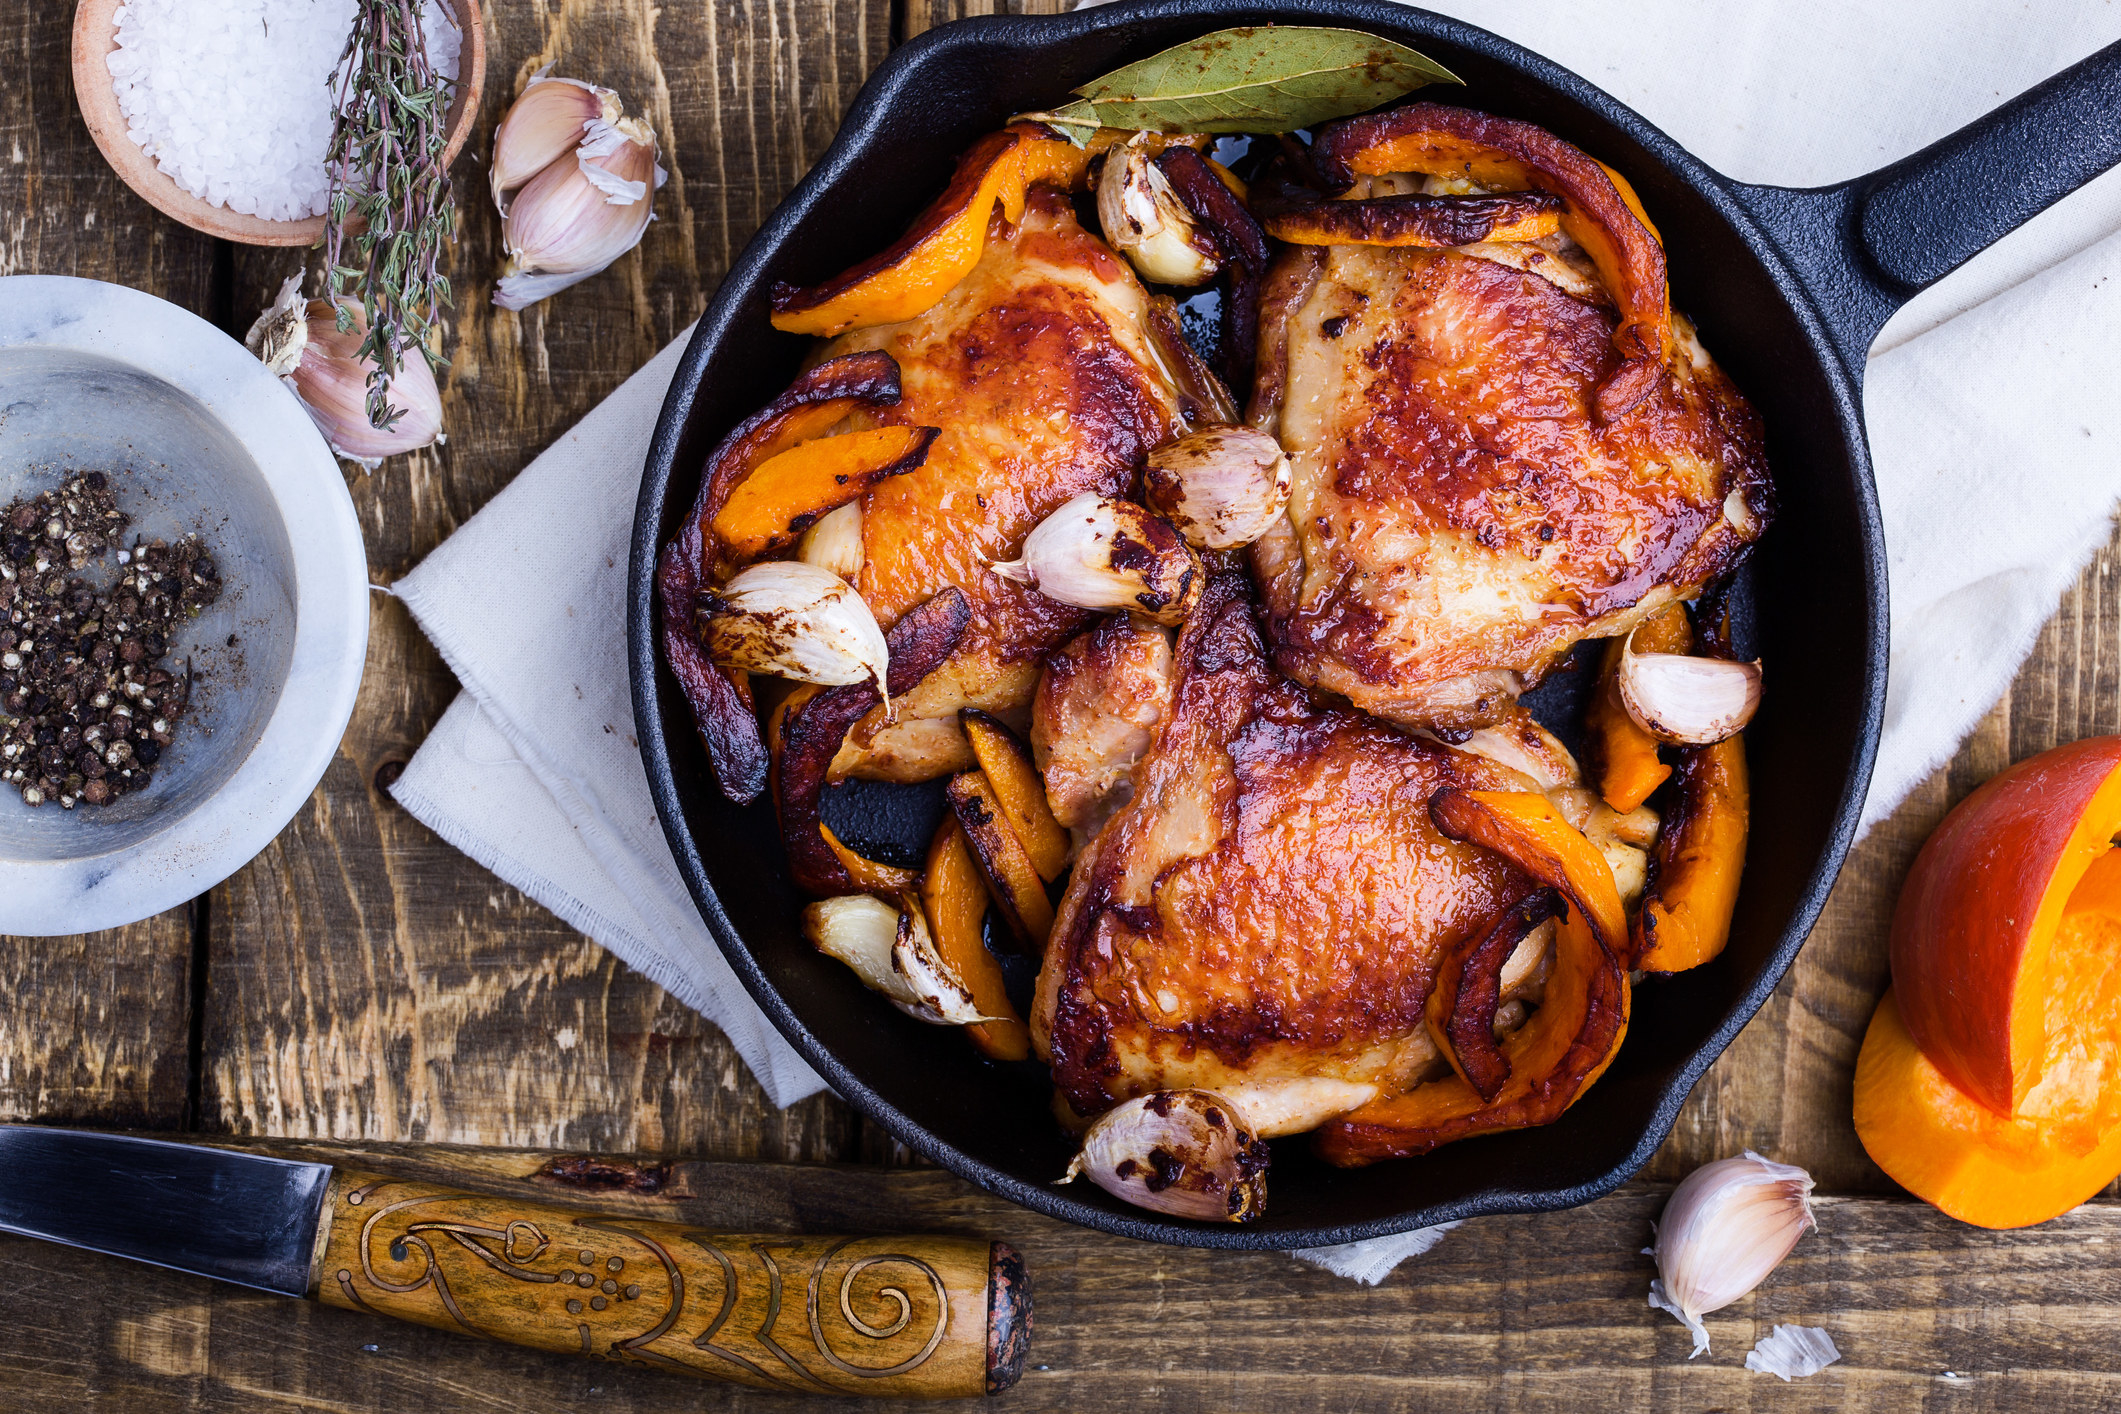 Roast chicken with garlic and vegetables